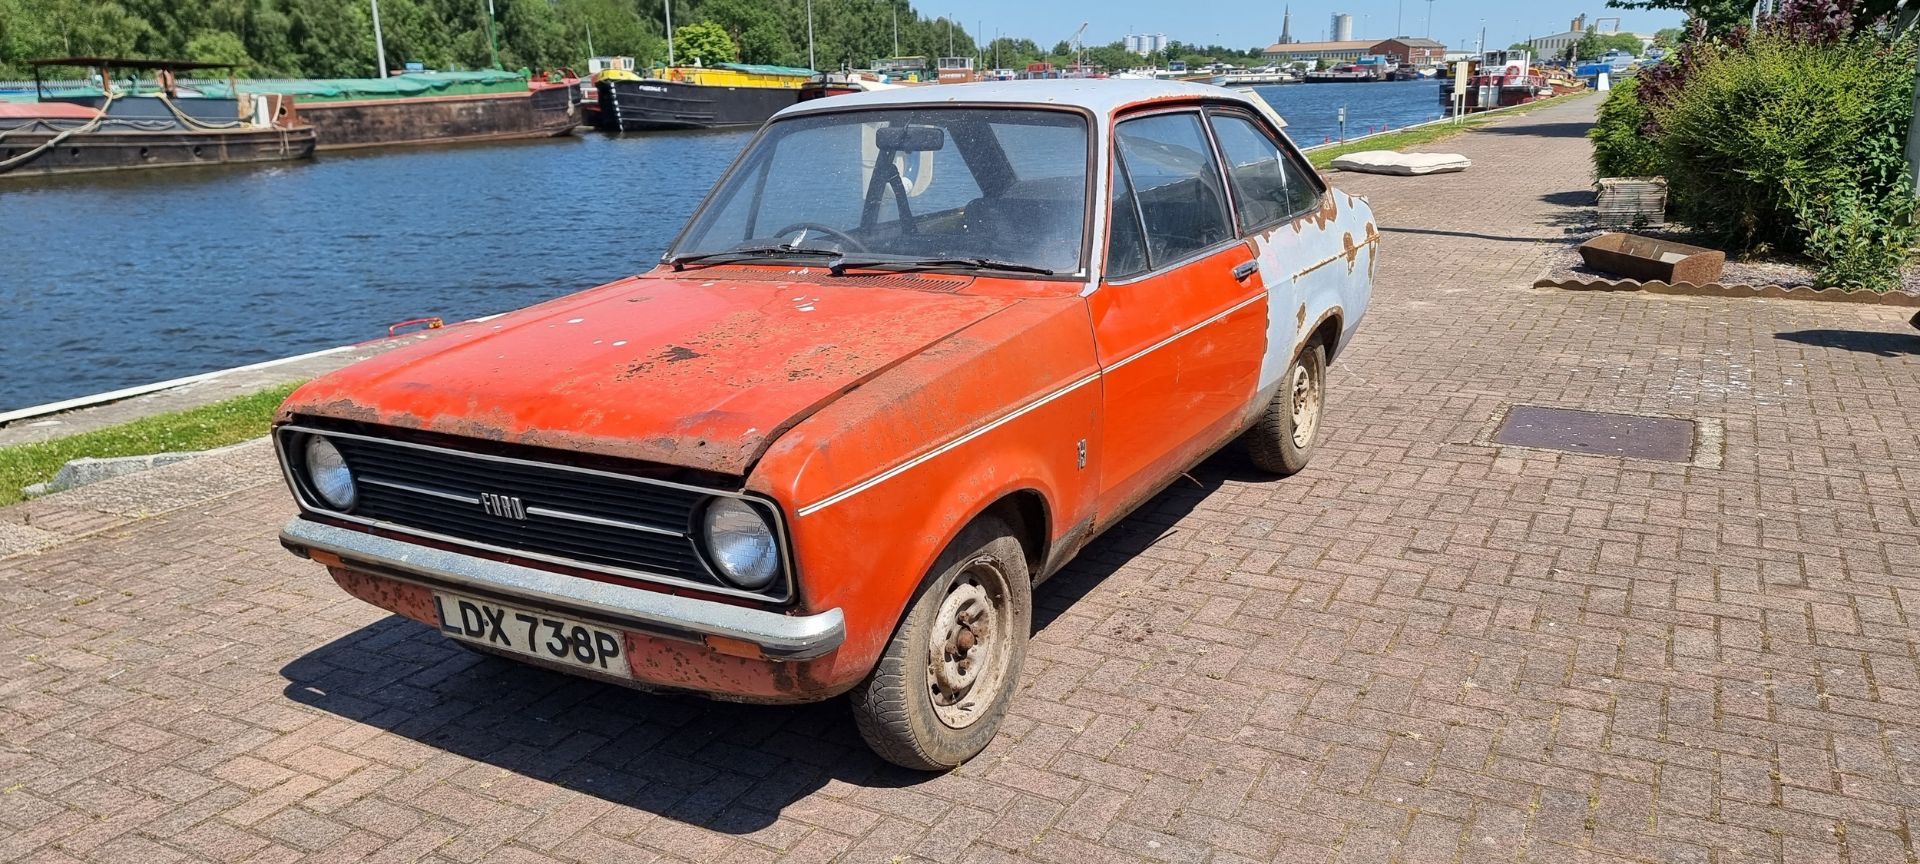 1975 Ford Escort 1.3L, 2 door, 1298cc, project. Registration number LDX 738P. Chassis number - Image 2 of 13